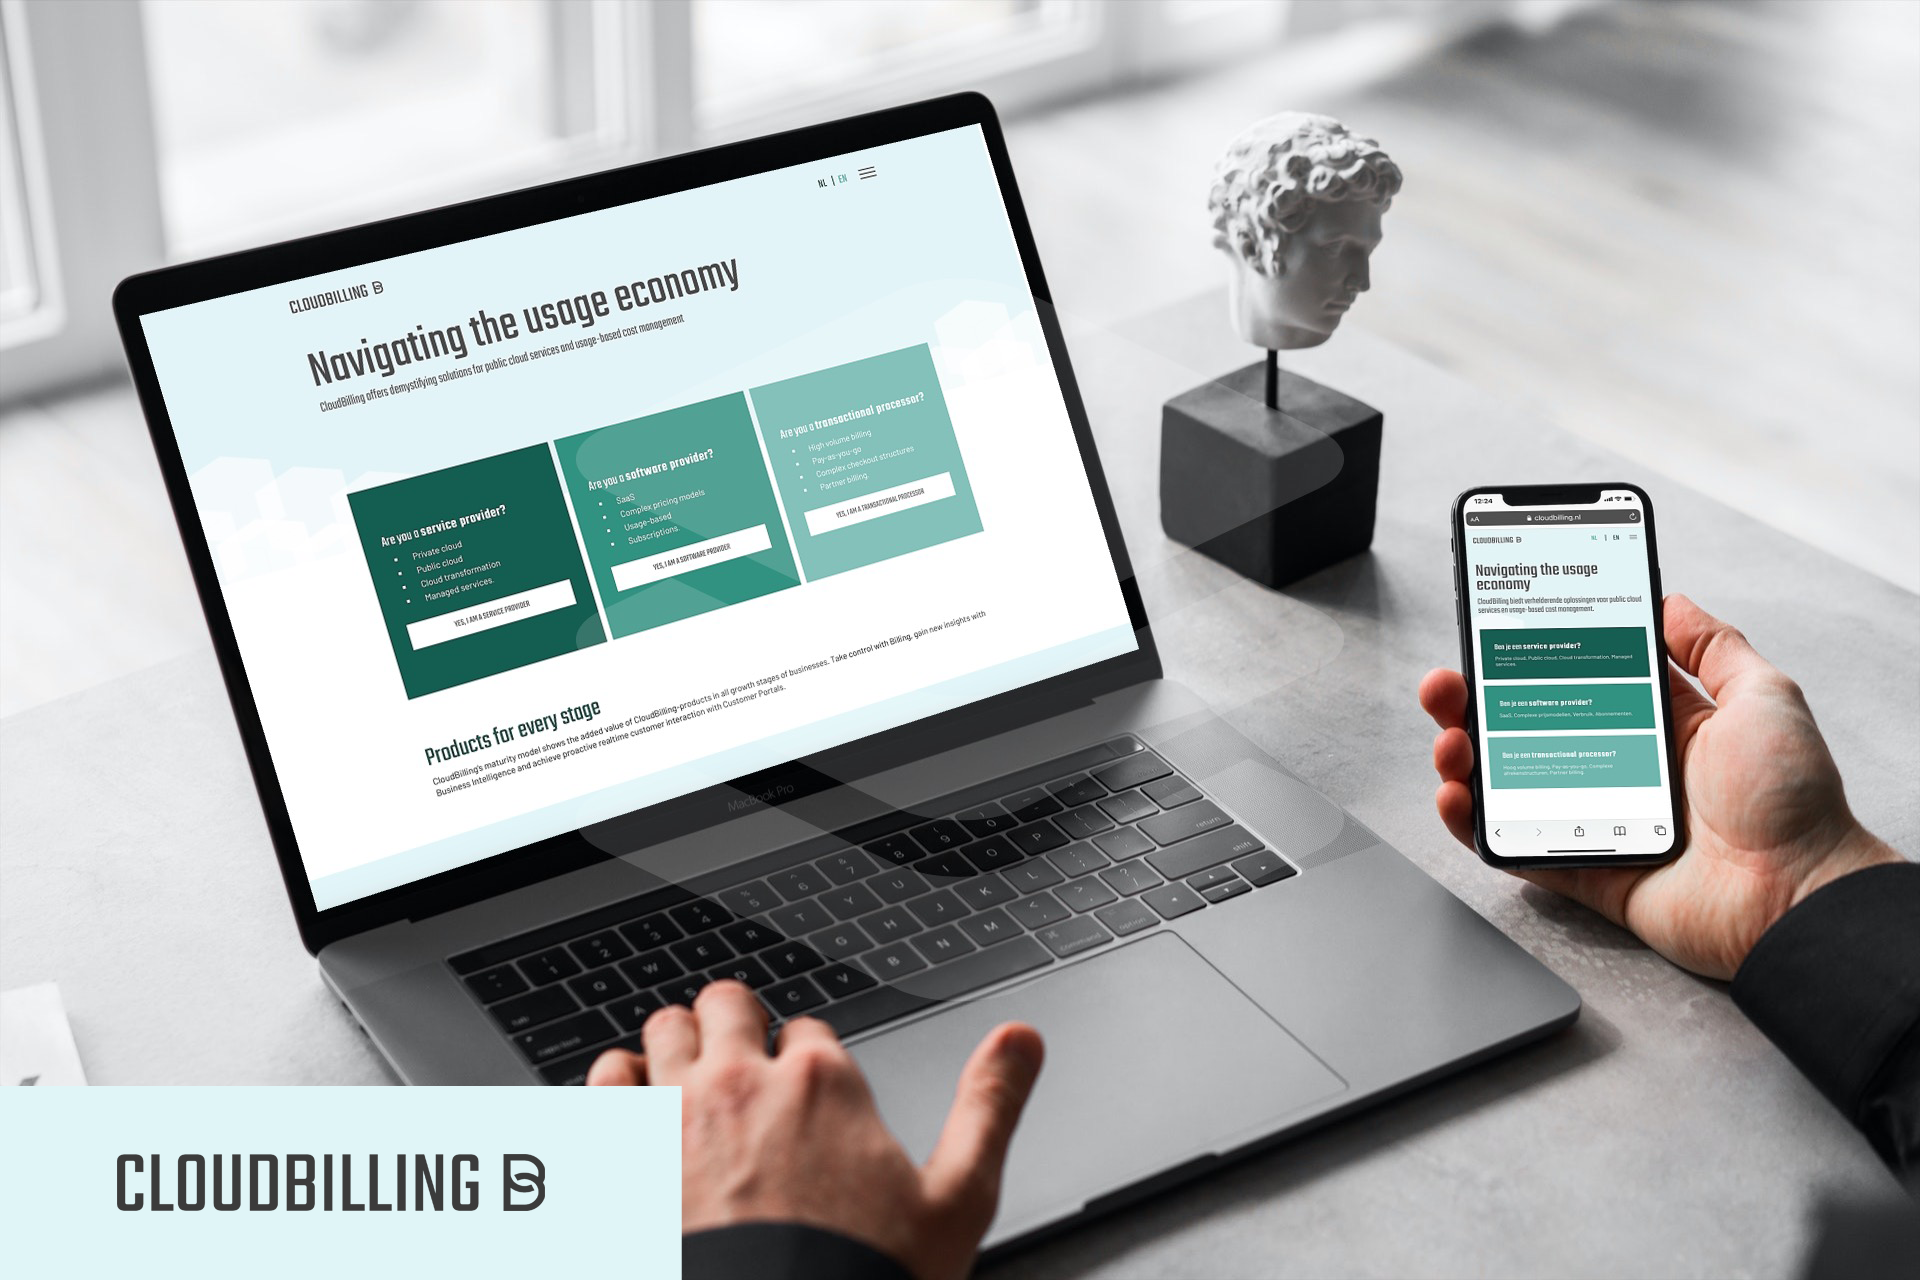 CloudBilling launches updated website with a new corporate identity